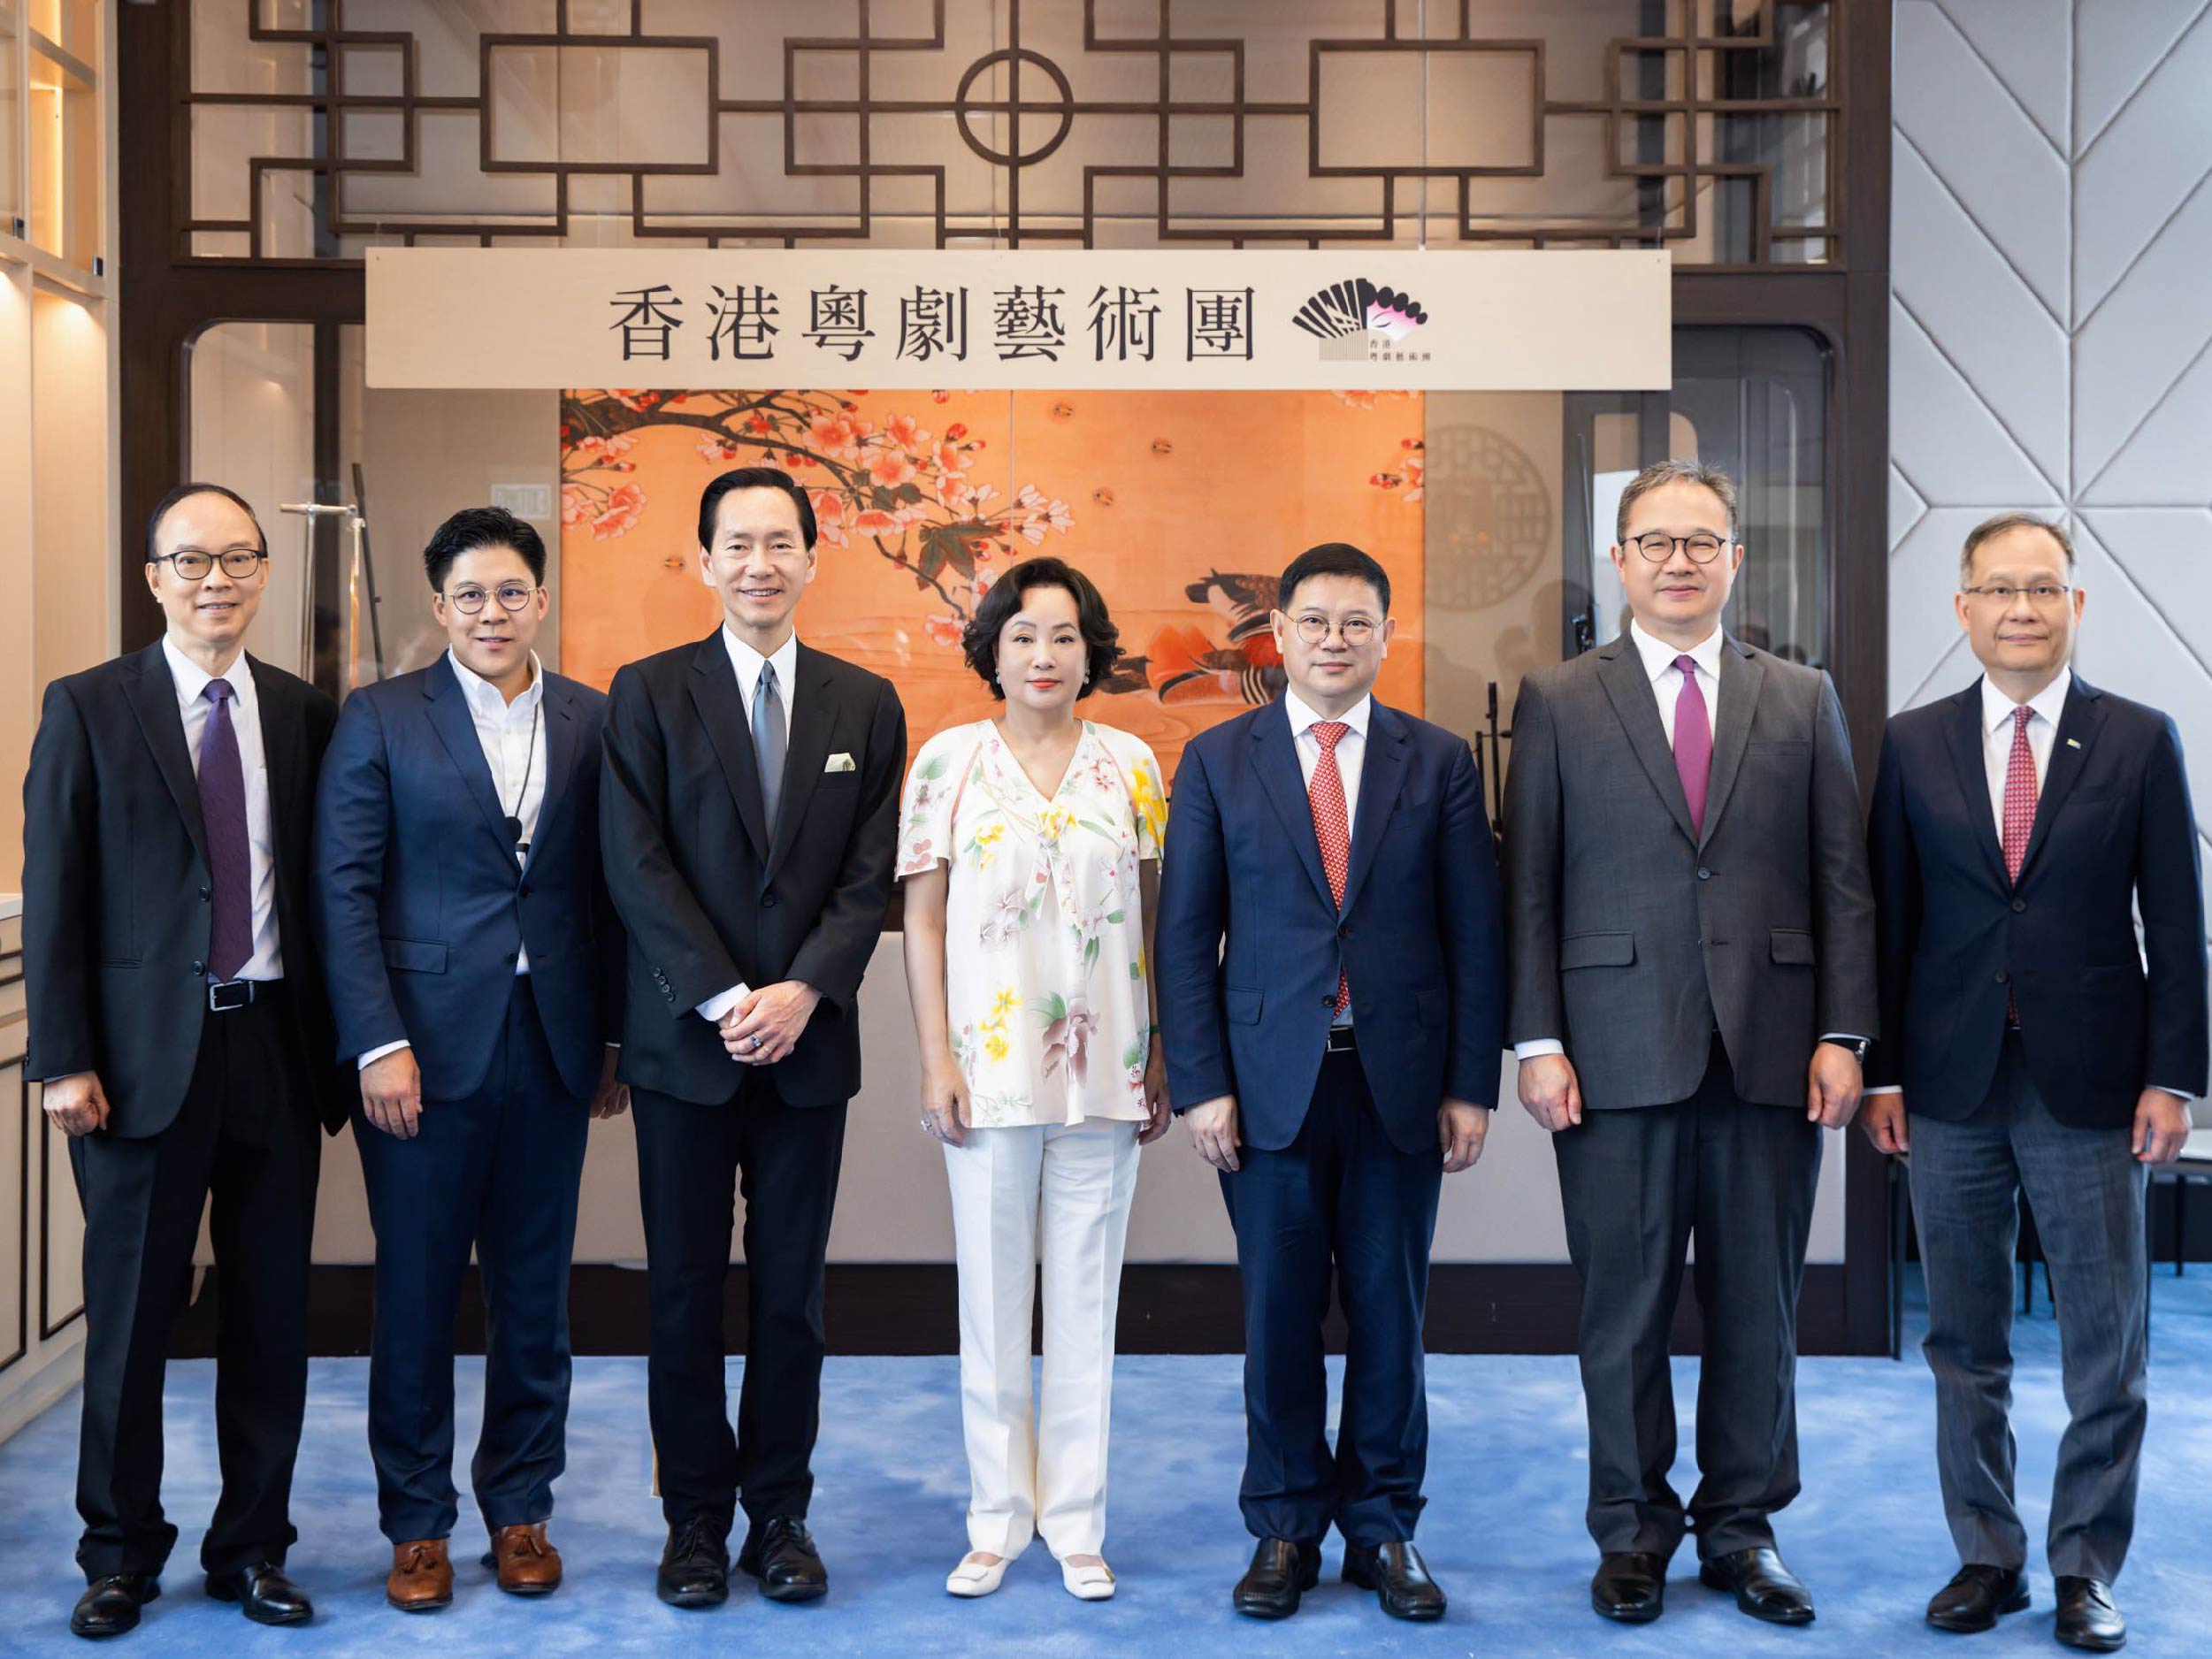 At the opening reception of the Hong Kong Cantonese Opera Troupe, its founder, Dr Ina Ho Chan Un-chan (middle), announces a donation to HKMU for the establishment of the Ina Ho Cantonese Opera Research Centre.